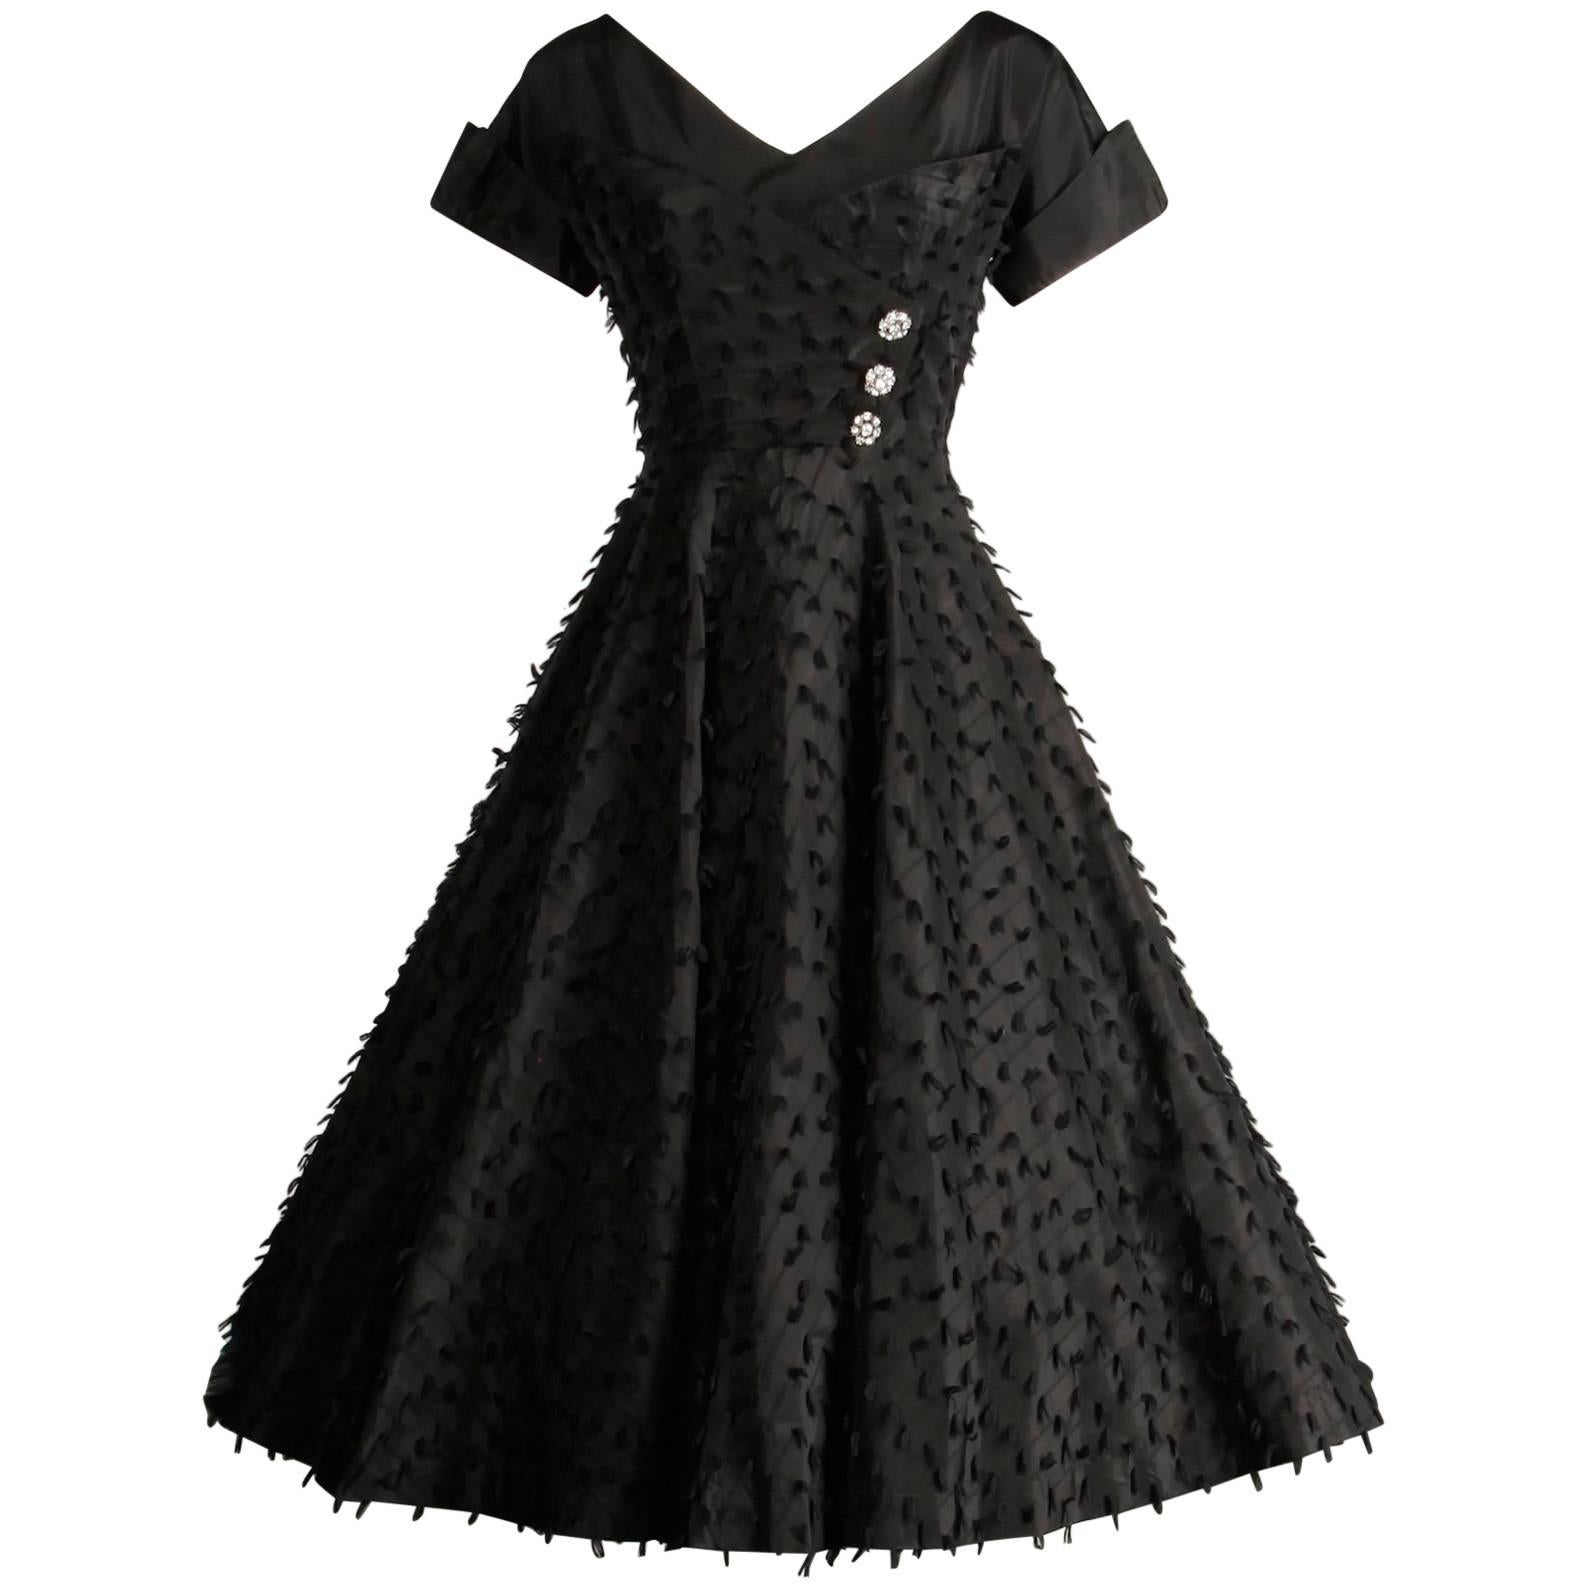 Black Taffeta Full Sweep Vintage Cocktail Dress with Rhinestone Buttons, 1950s 